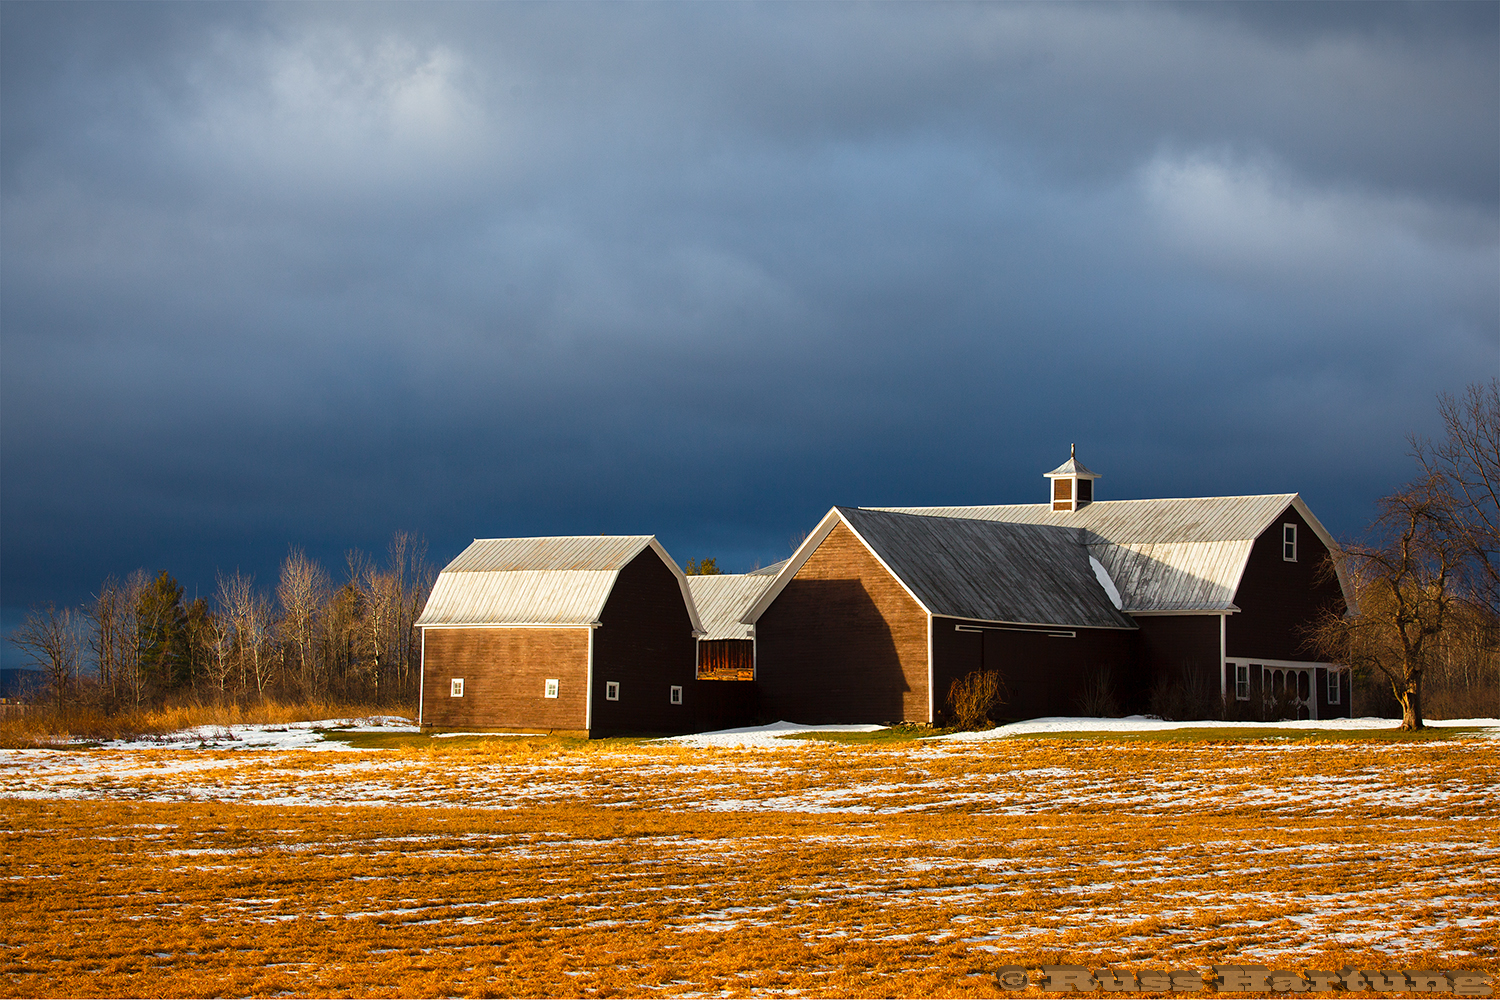 Sunrise highlights this barn in Plattsburgh, New York while the sky was still dark from a passing storm. 